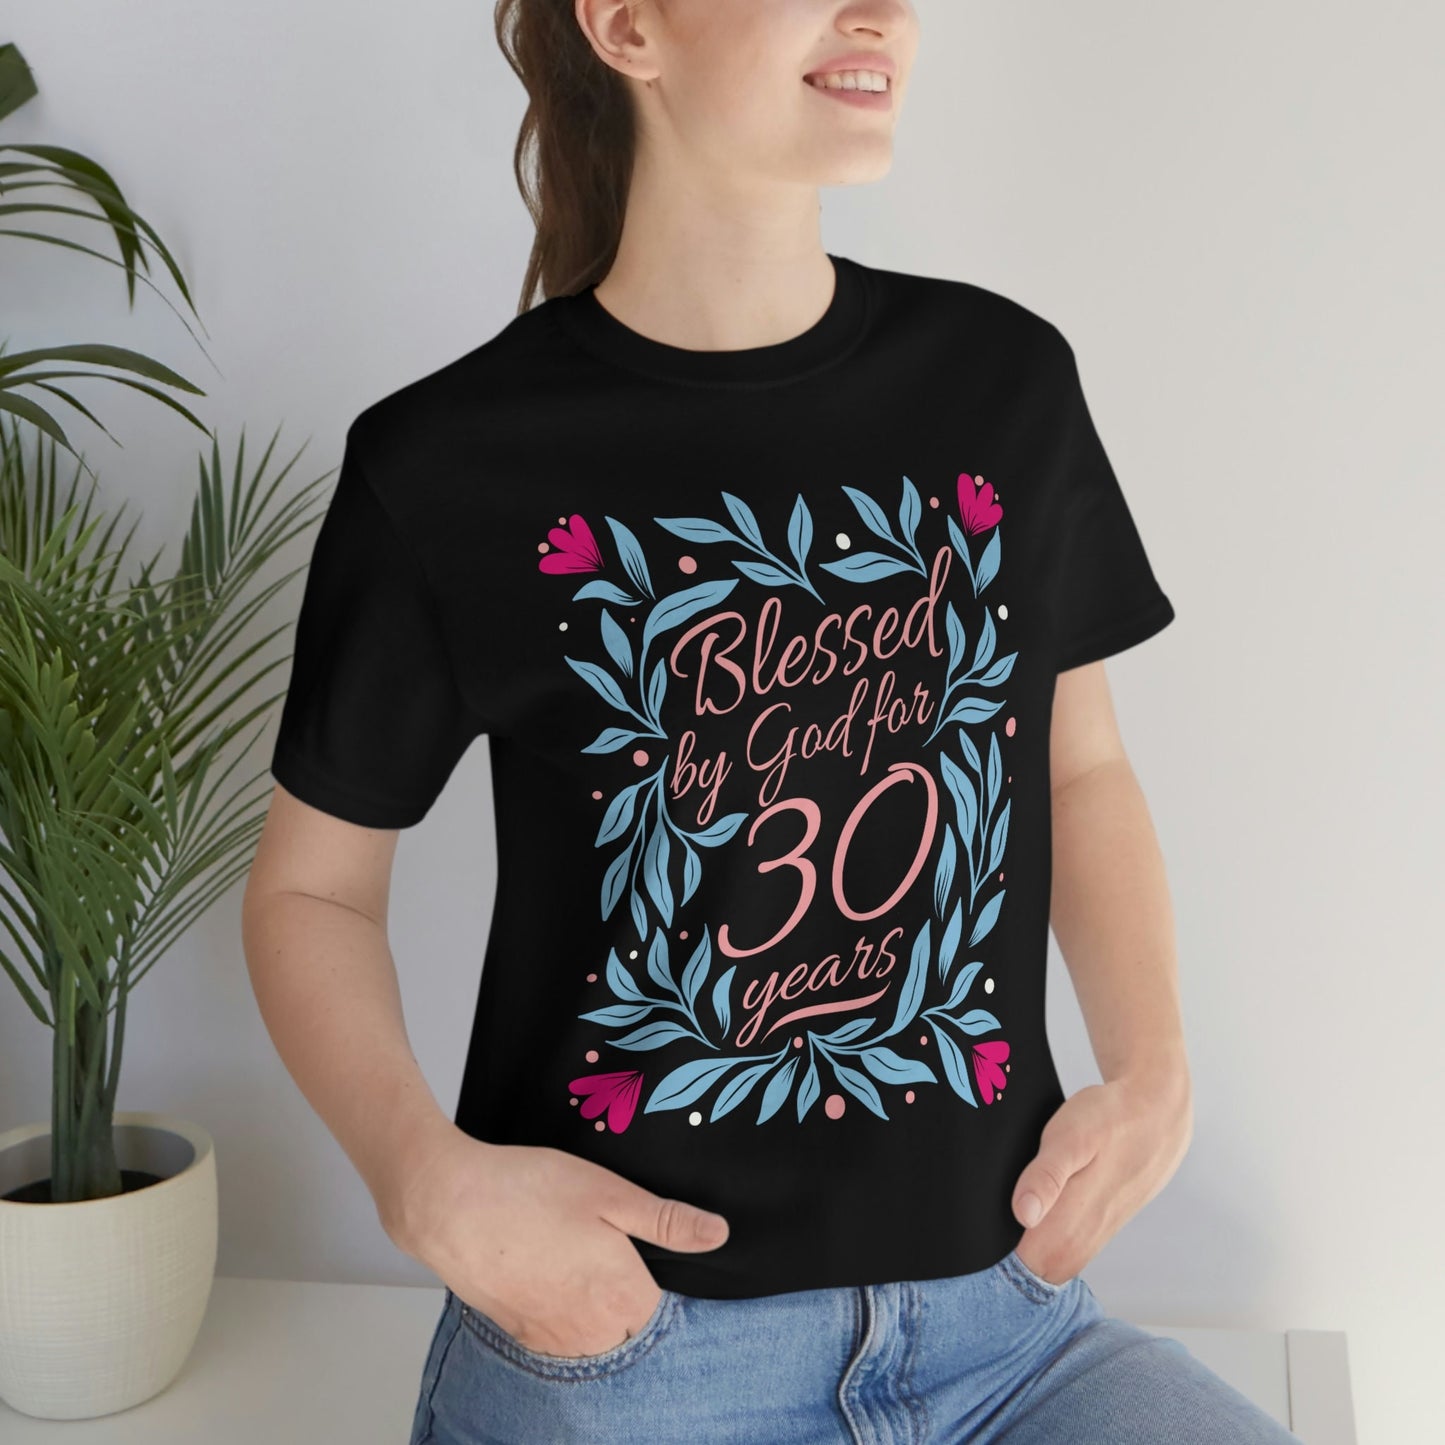 Blessed by God for 30 years gift t-shirt for women or wife